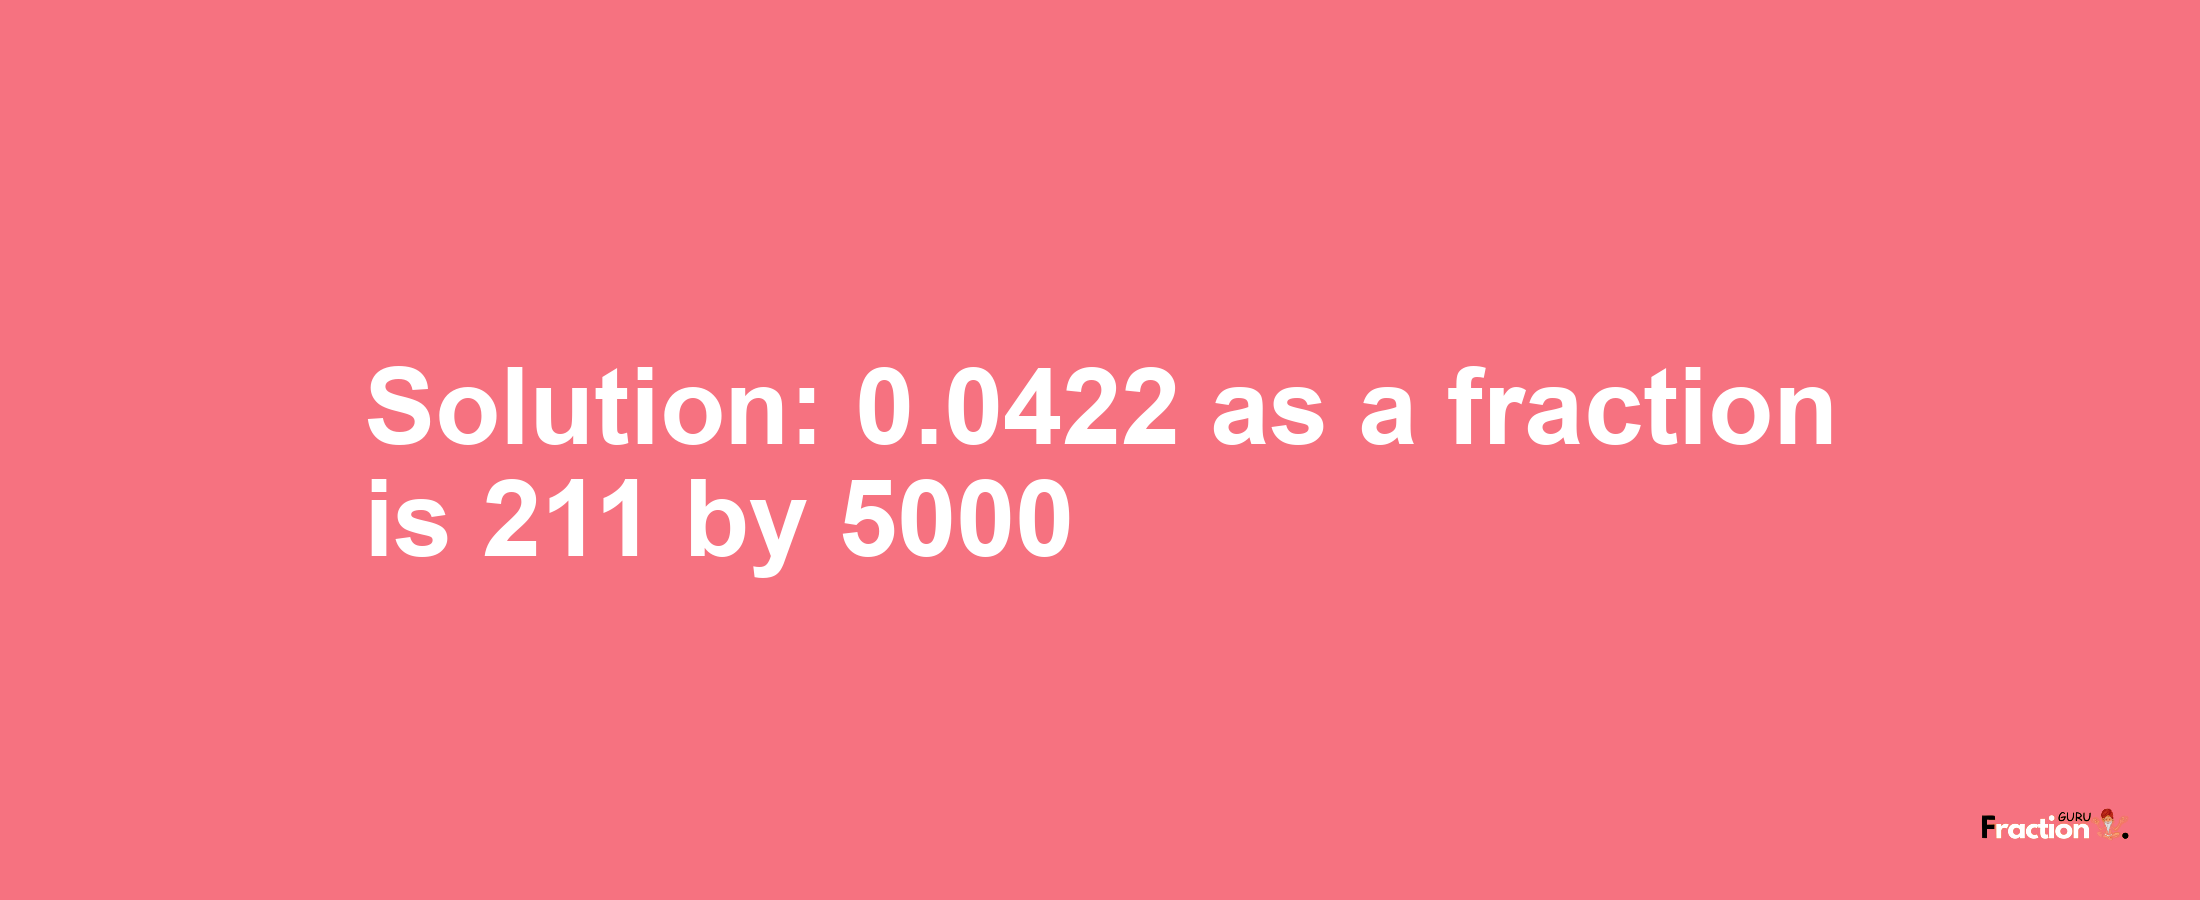 Solution:0.0422 as a fraction is 211/5000